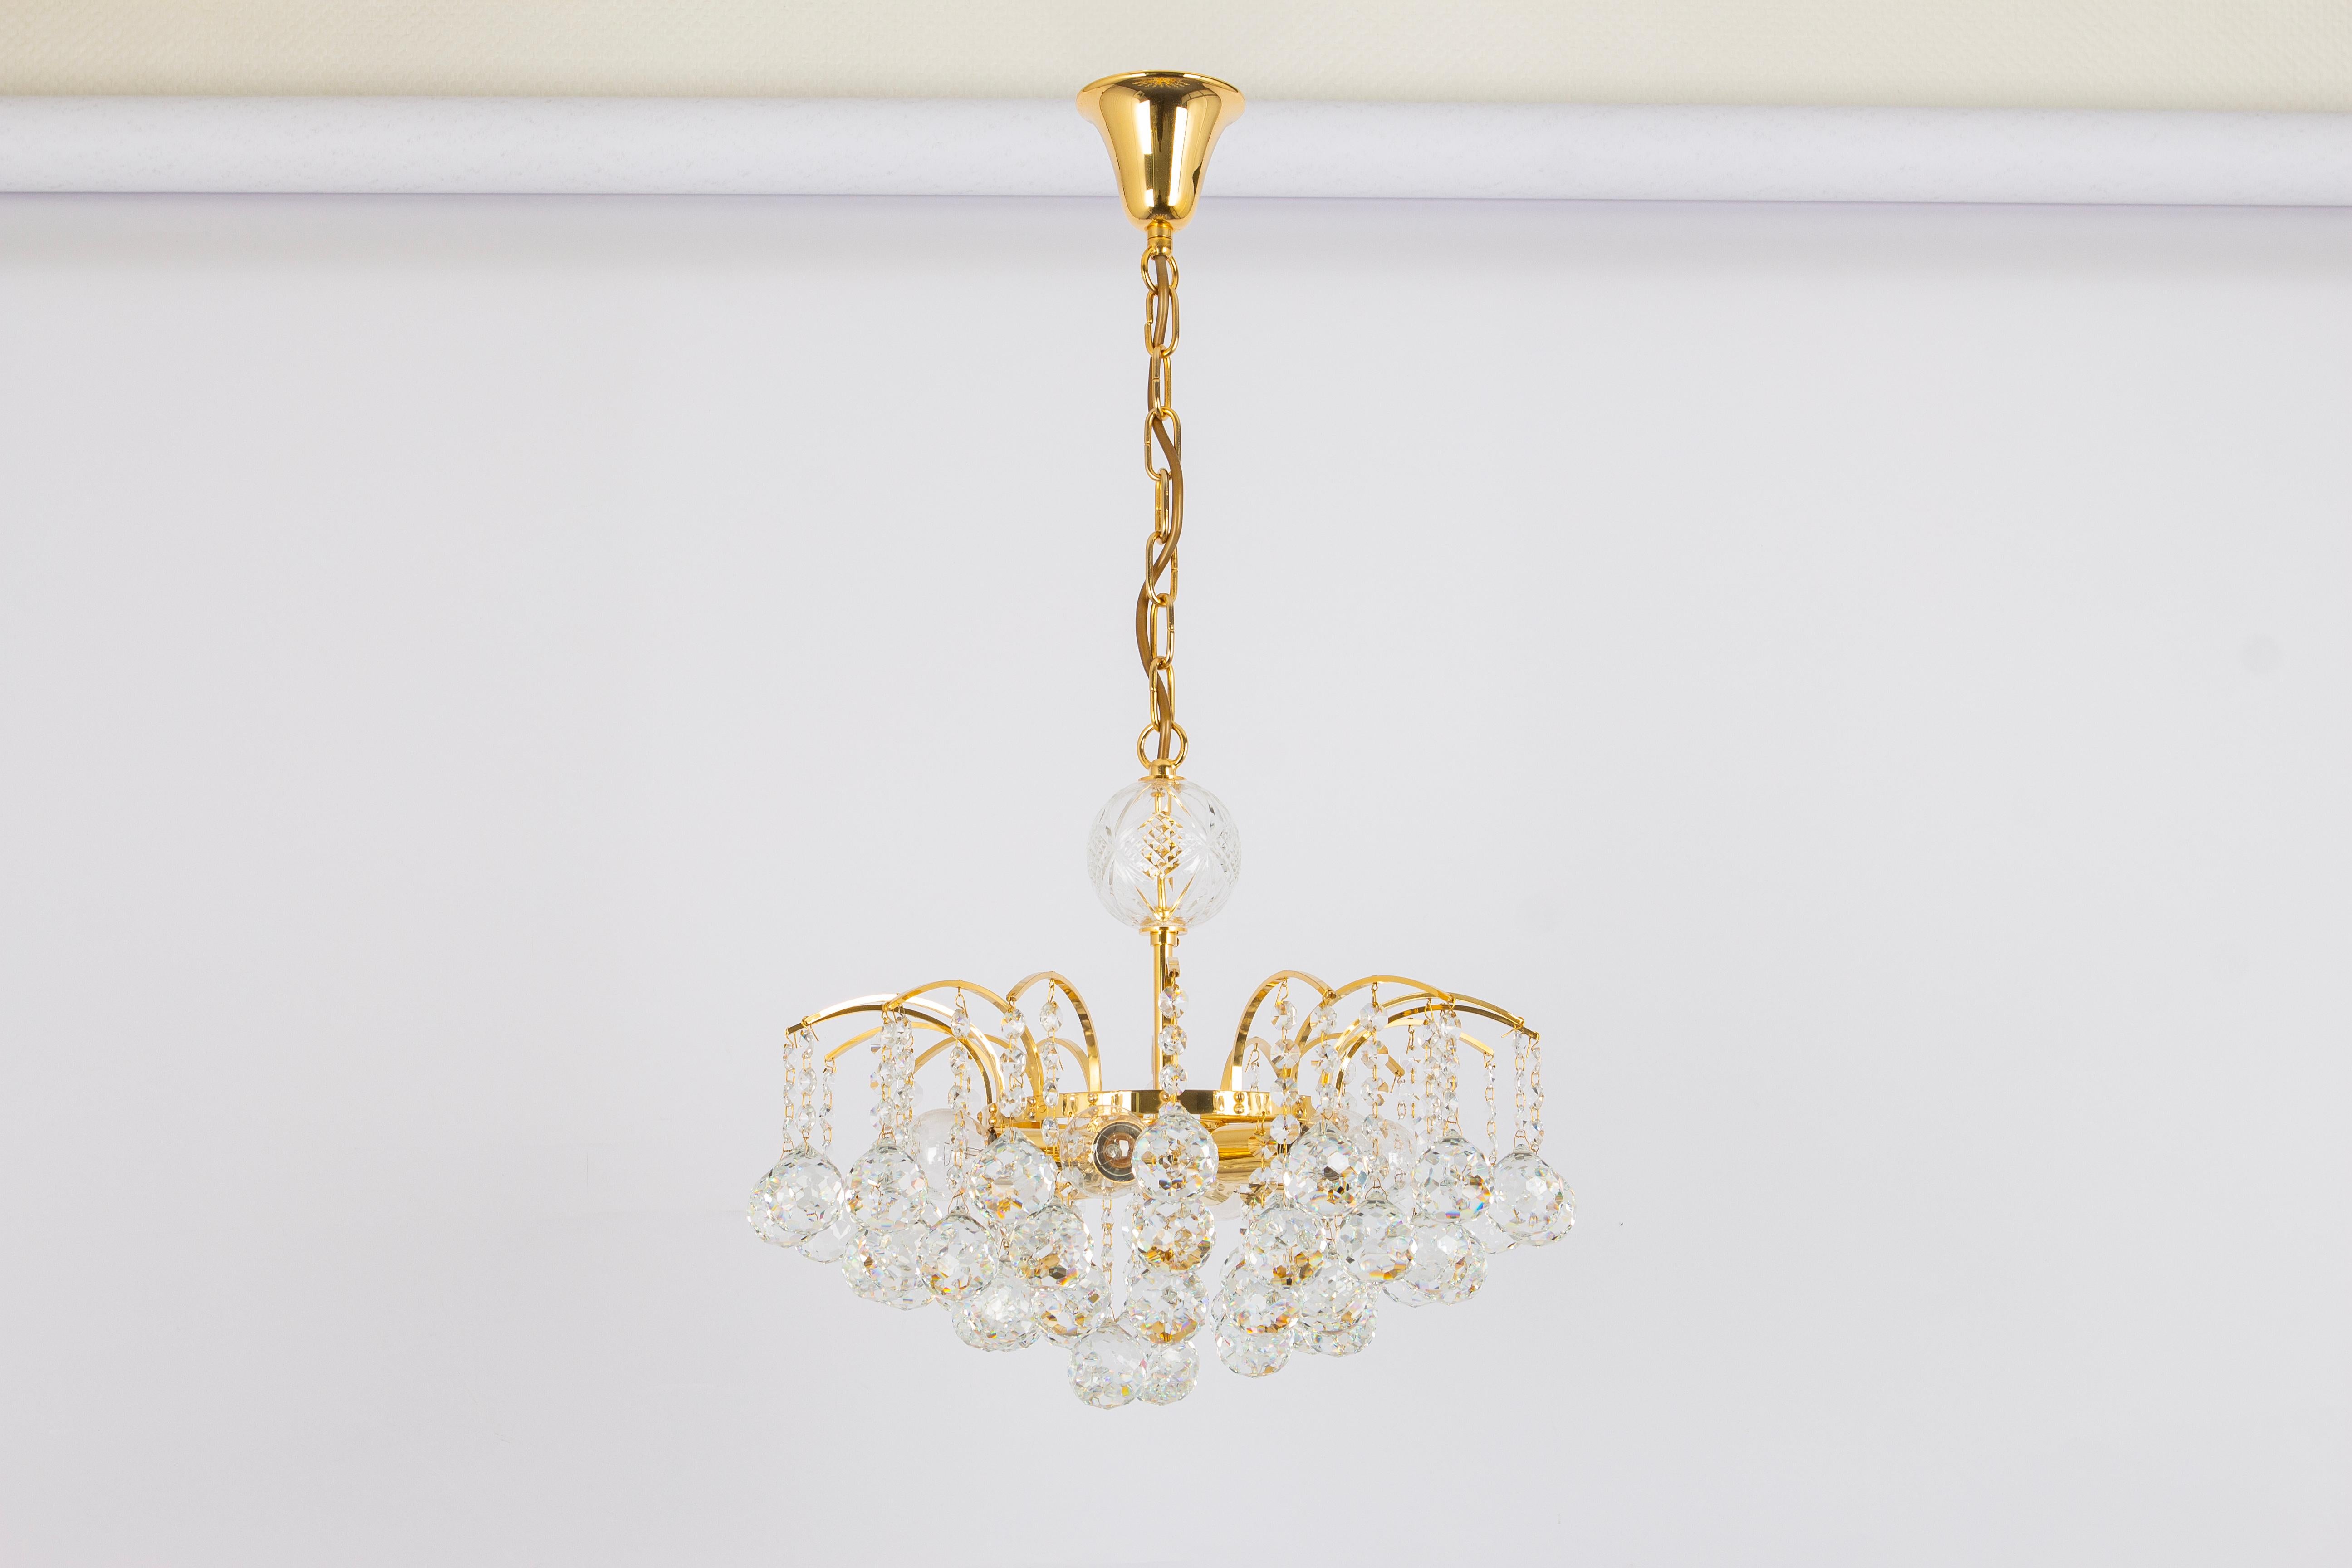 Elegant Petite Chandelier with wonderful crystal balls on a brass base suspended from tiny hooks.
From: Christoph Palme, Germany, circa 1970s. 

High quality and in very good condition. Cleaned, well-wired and ready to use. 

The fixture requires 6